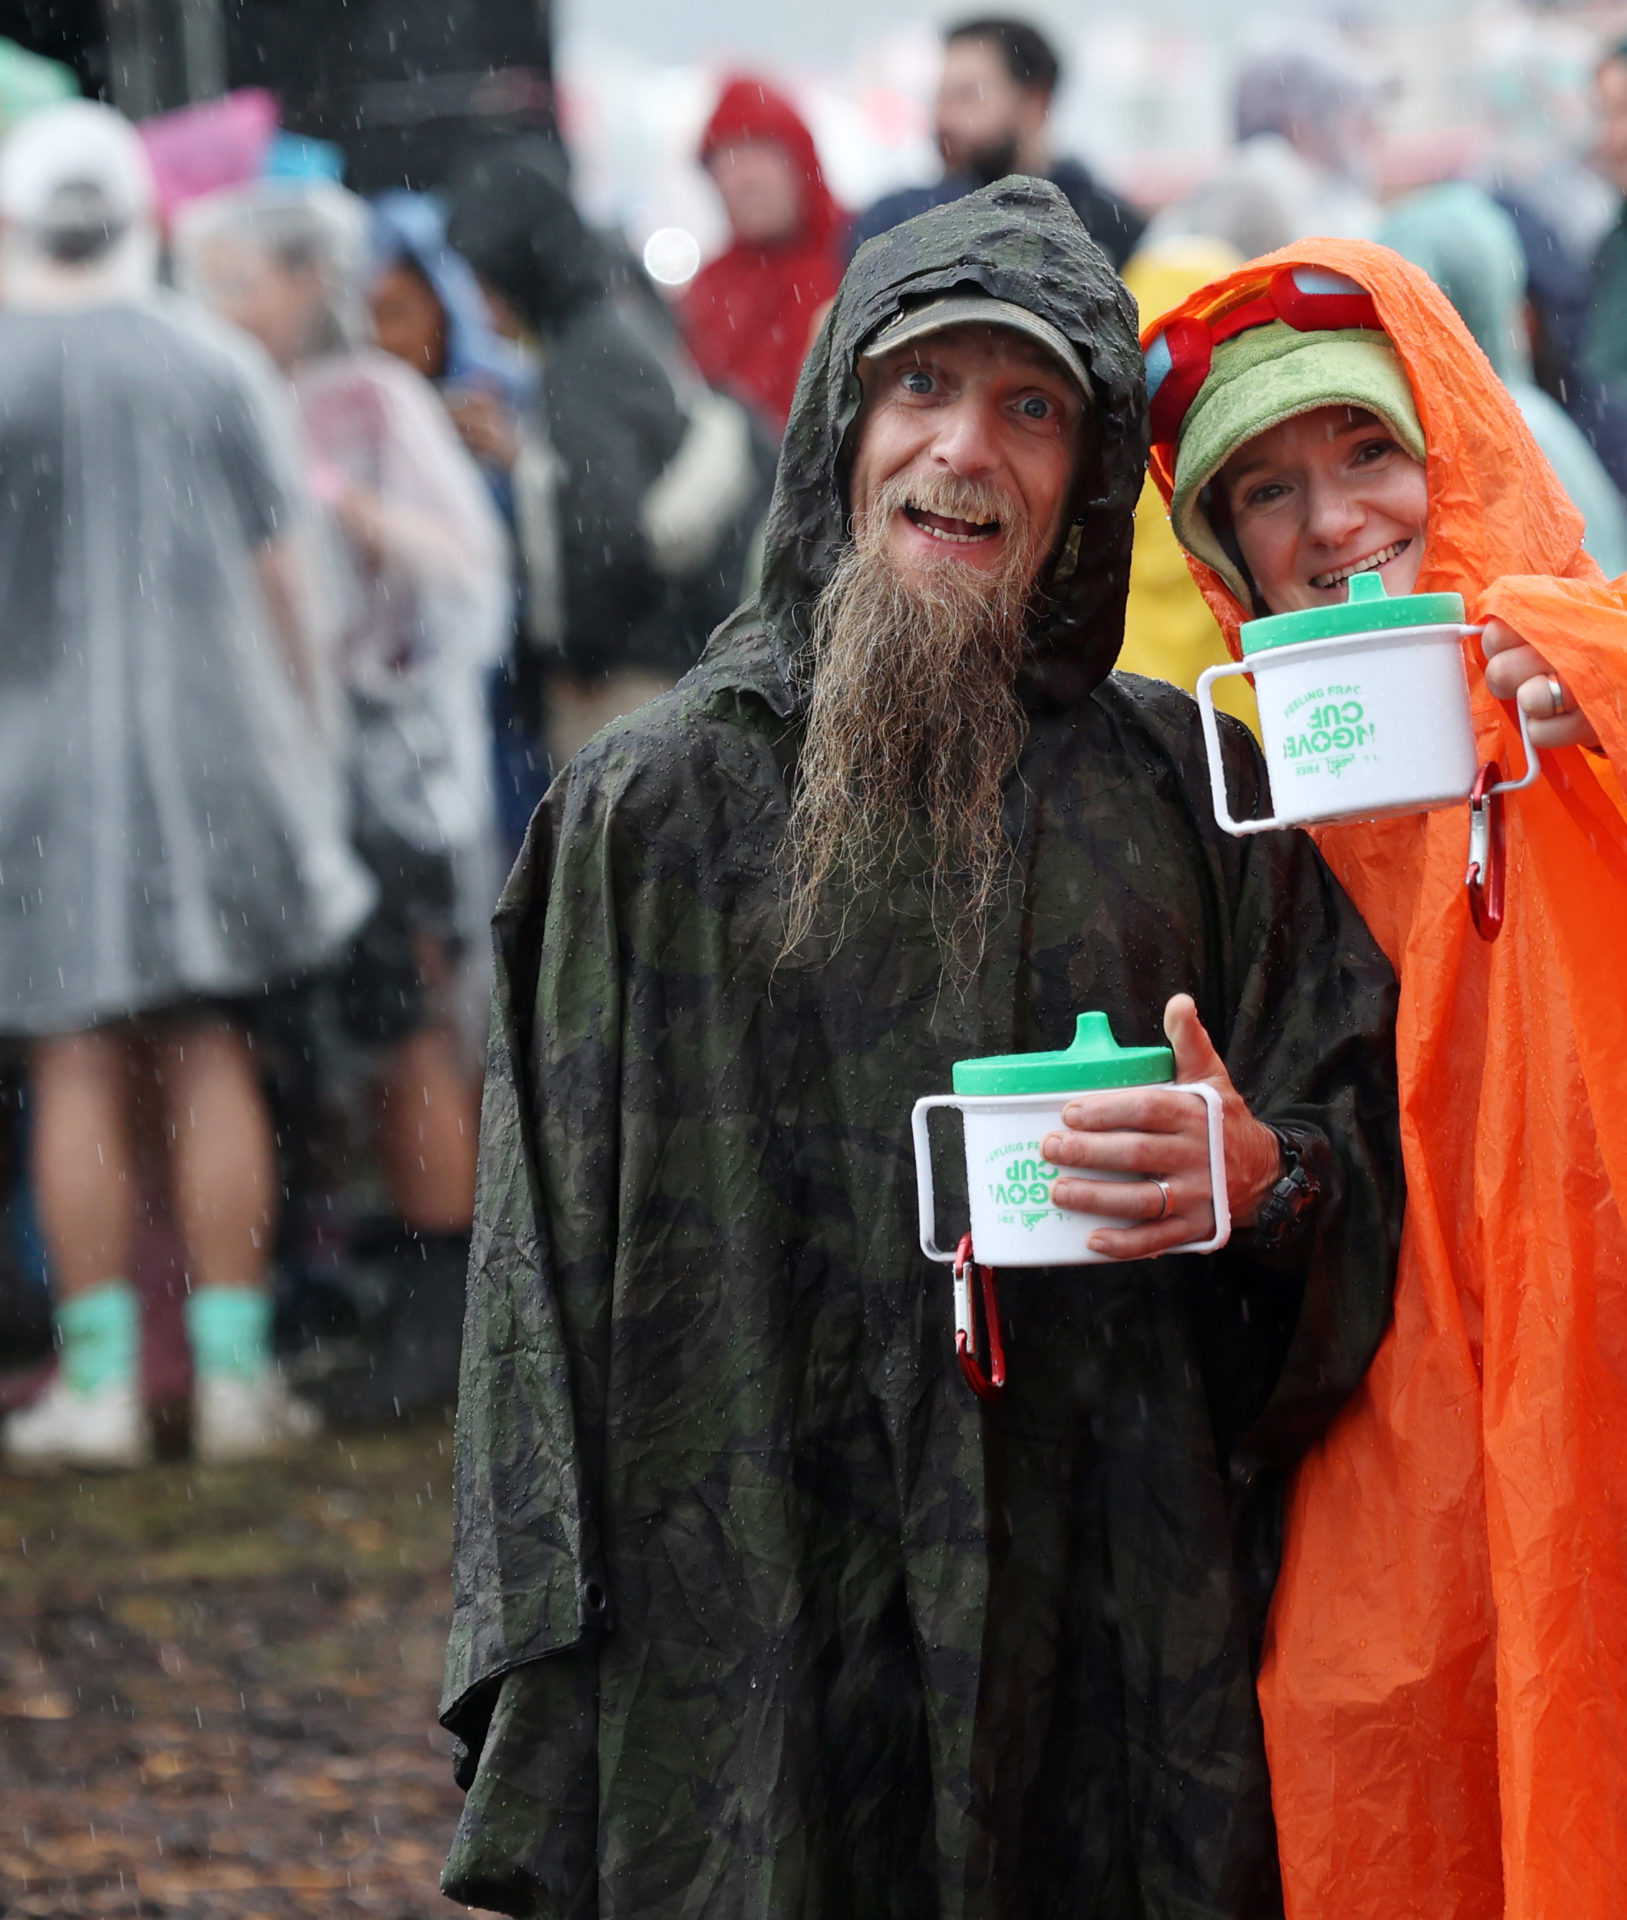 Fans wearing plastic raincoats to protect themselves from the rainy weather at Electric Picnic